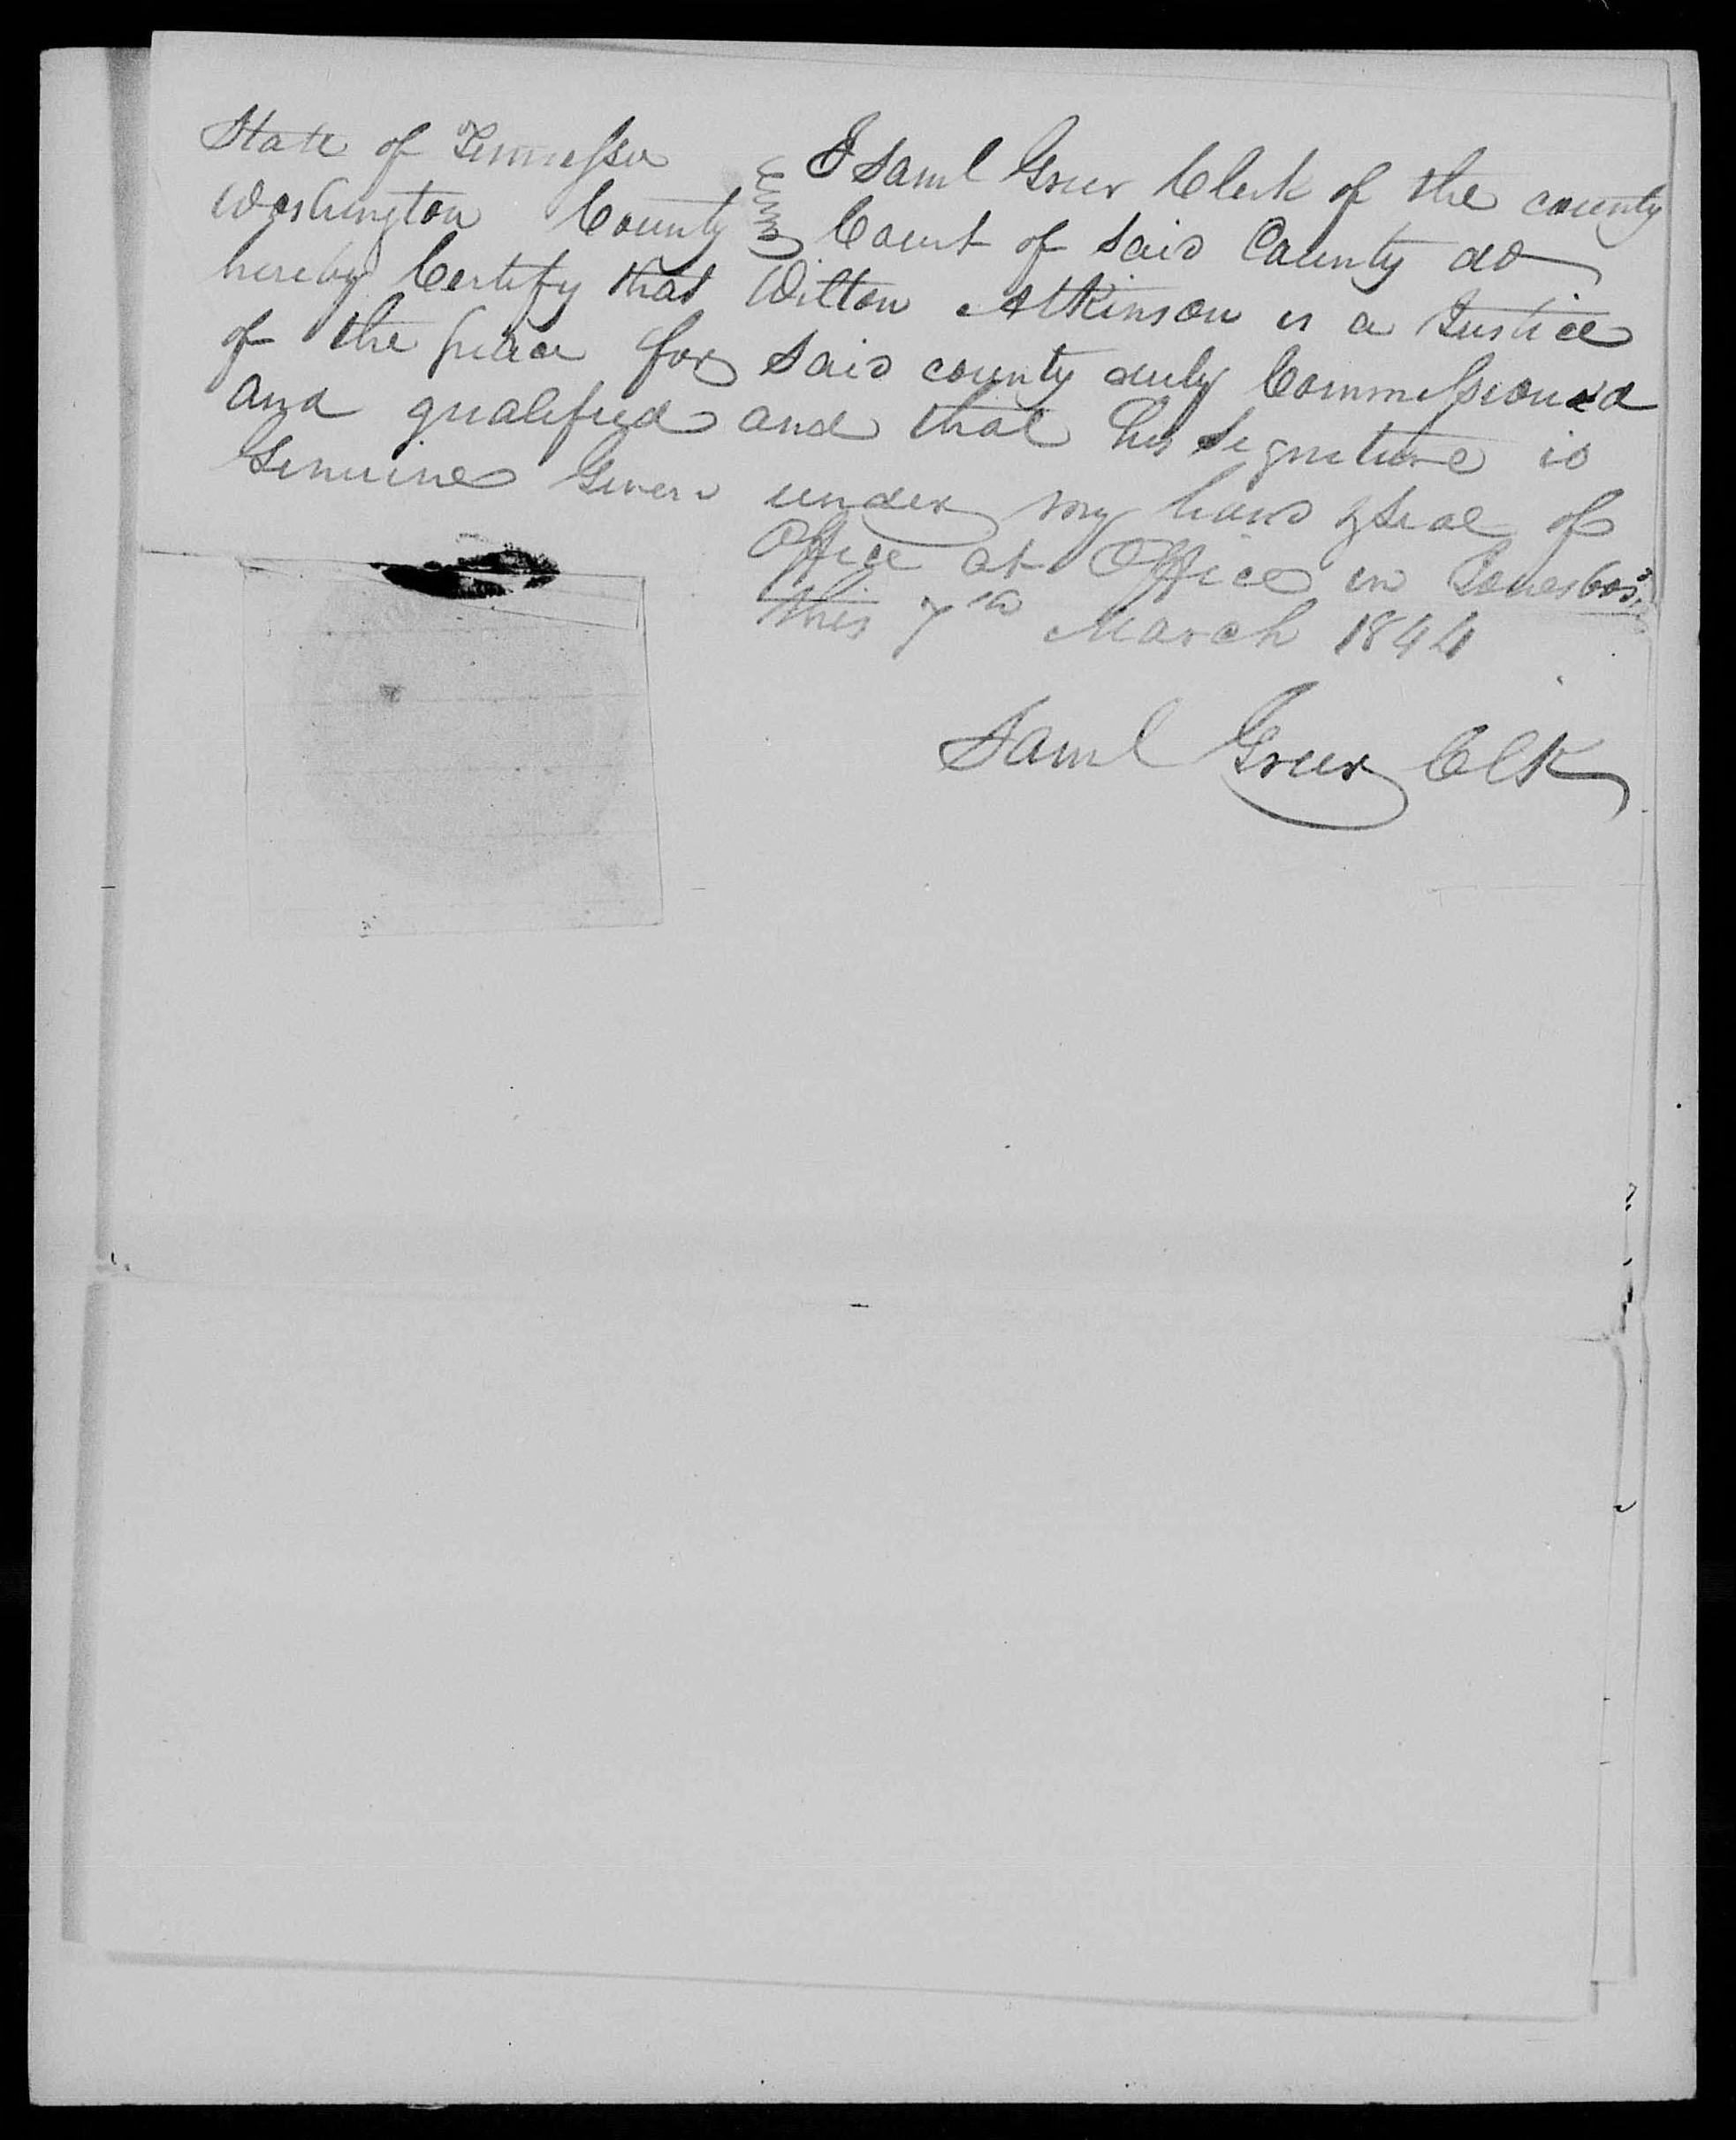 Affidavit of Henry Taylor in support of a Pension Claim for Ruth Edwards, 7 March 1844, page 3